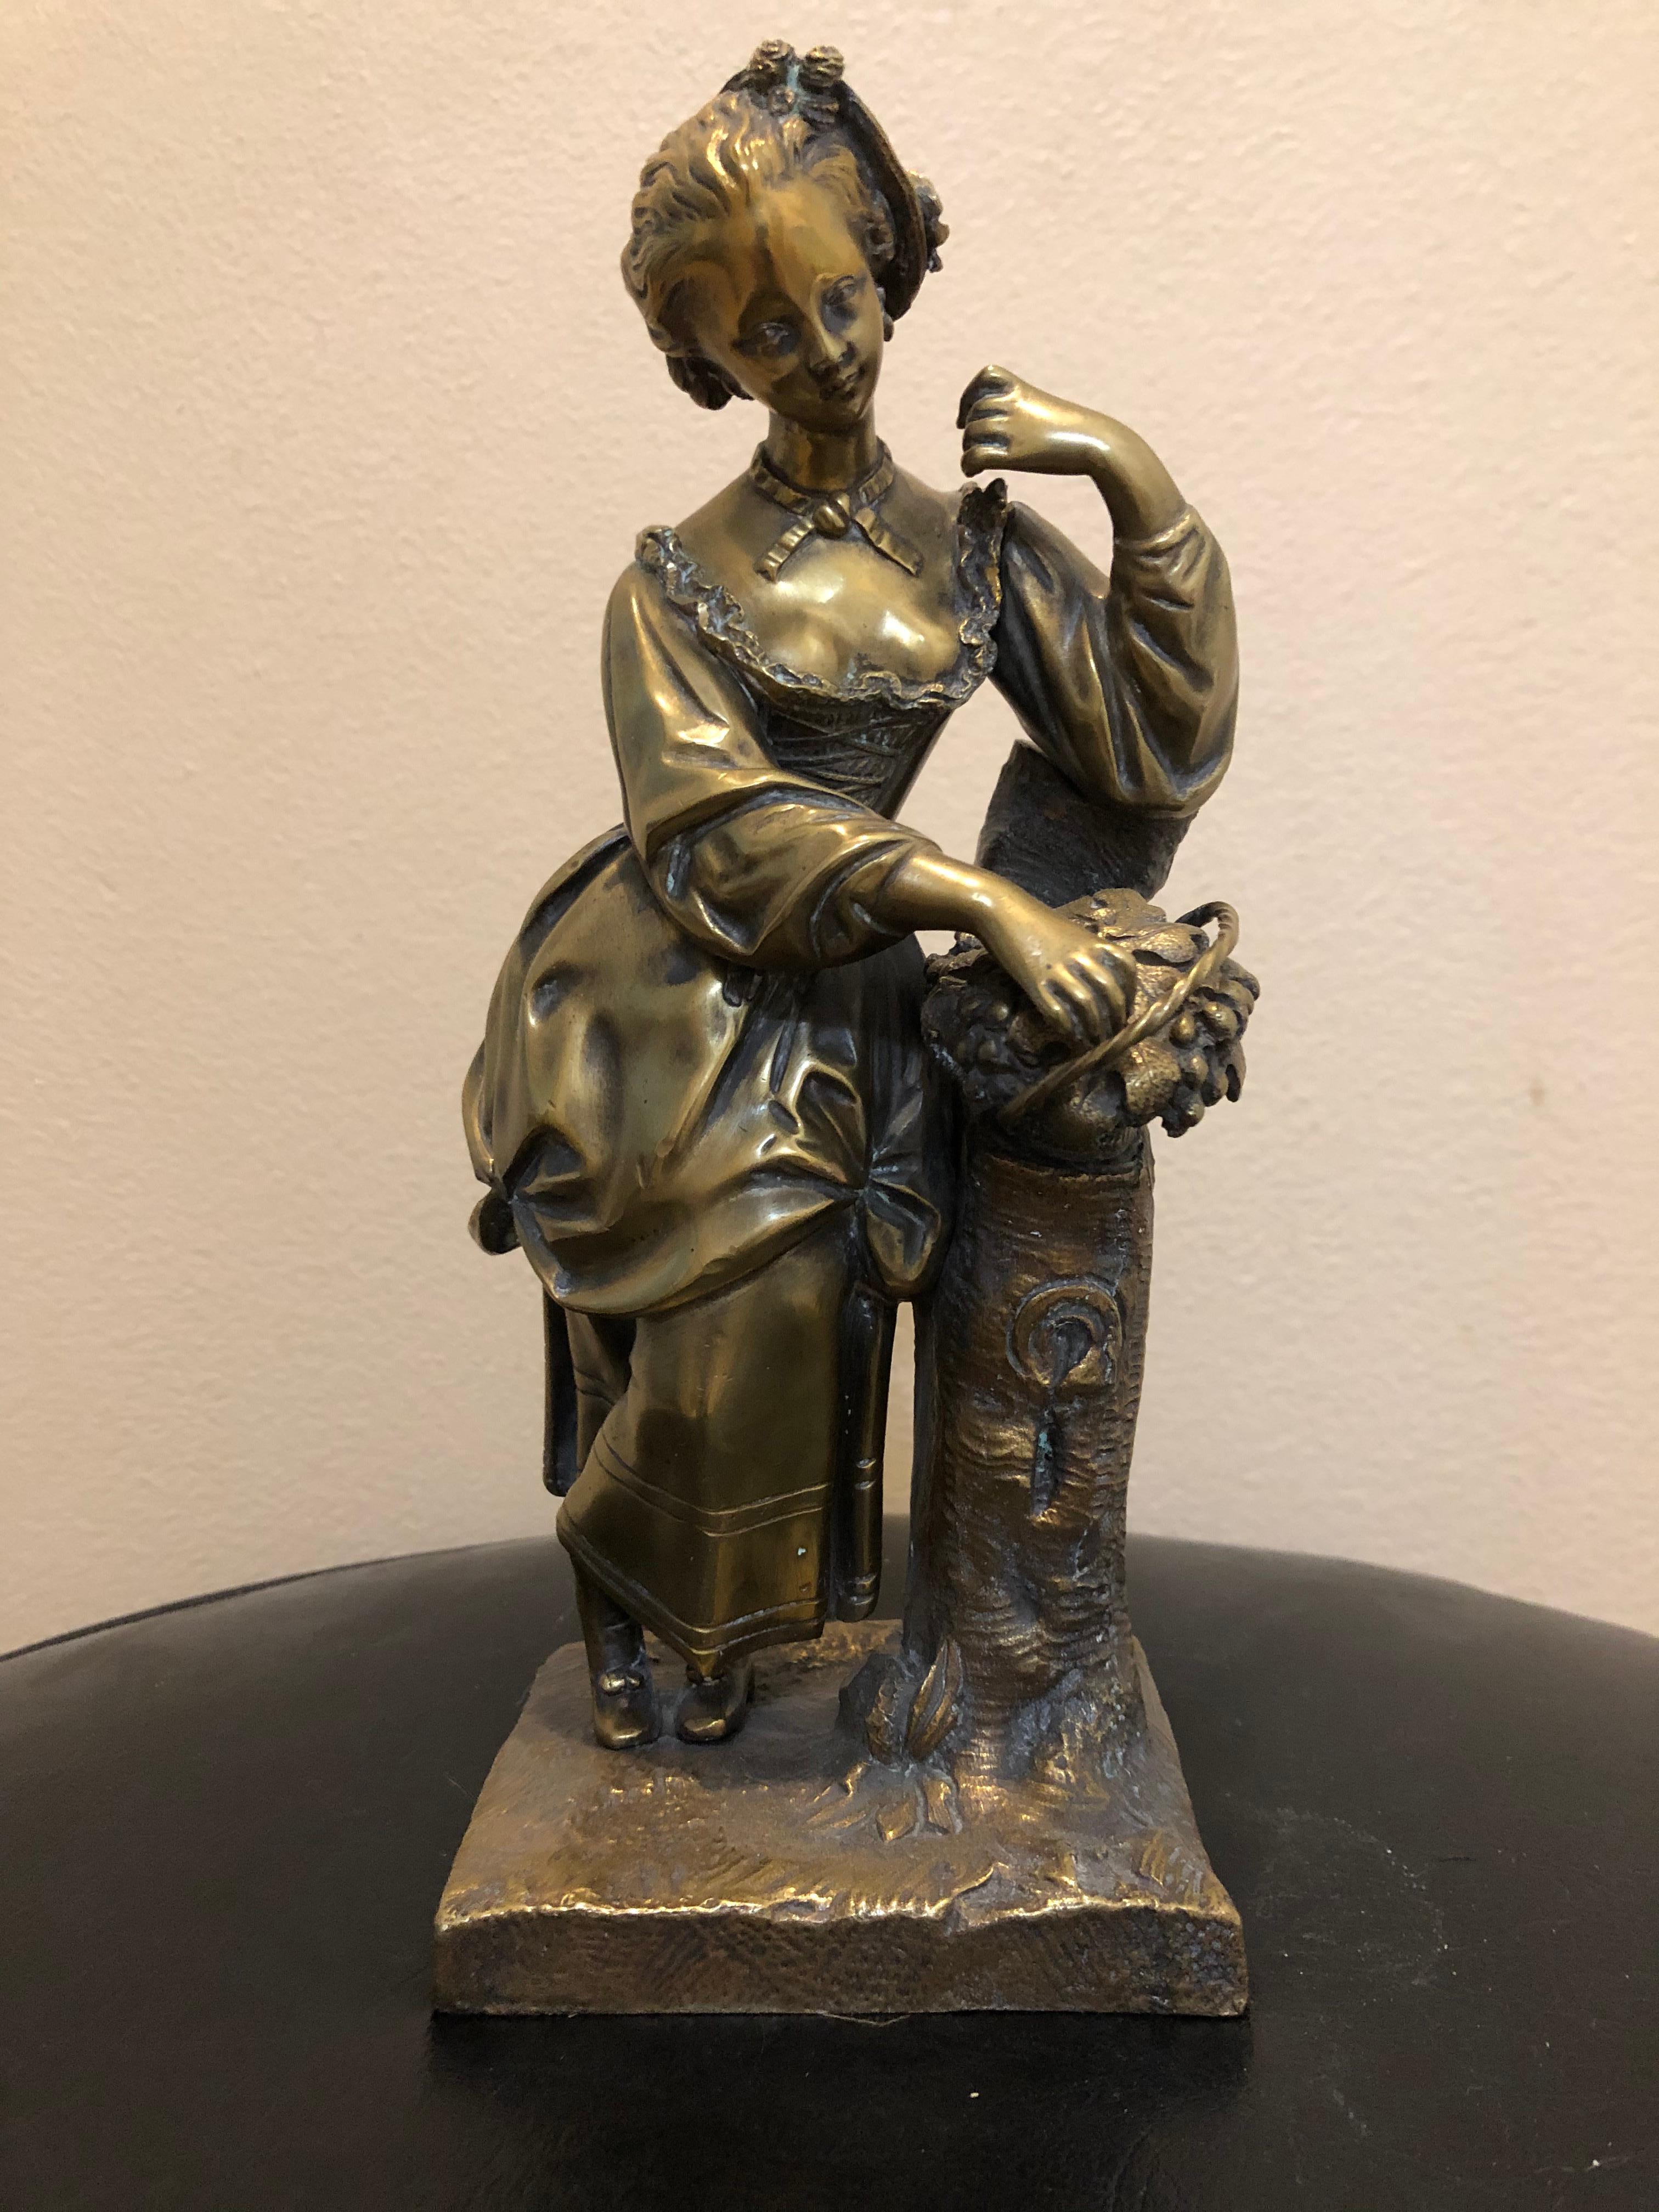 Extremely beautifully detailed 19th century bronze. A lady leaning on a tree stump after picking flowers for her basket. Great original patina. Sculpture measures 9 1/4 inches high, 4 inches wide by 3 1/4 deep.